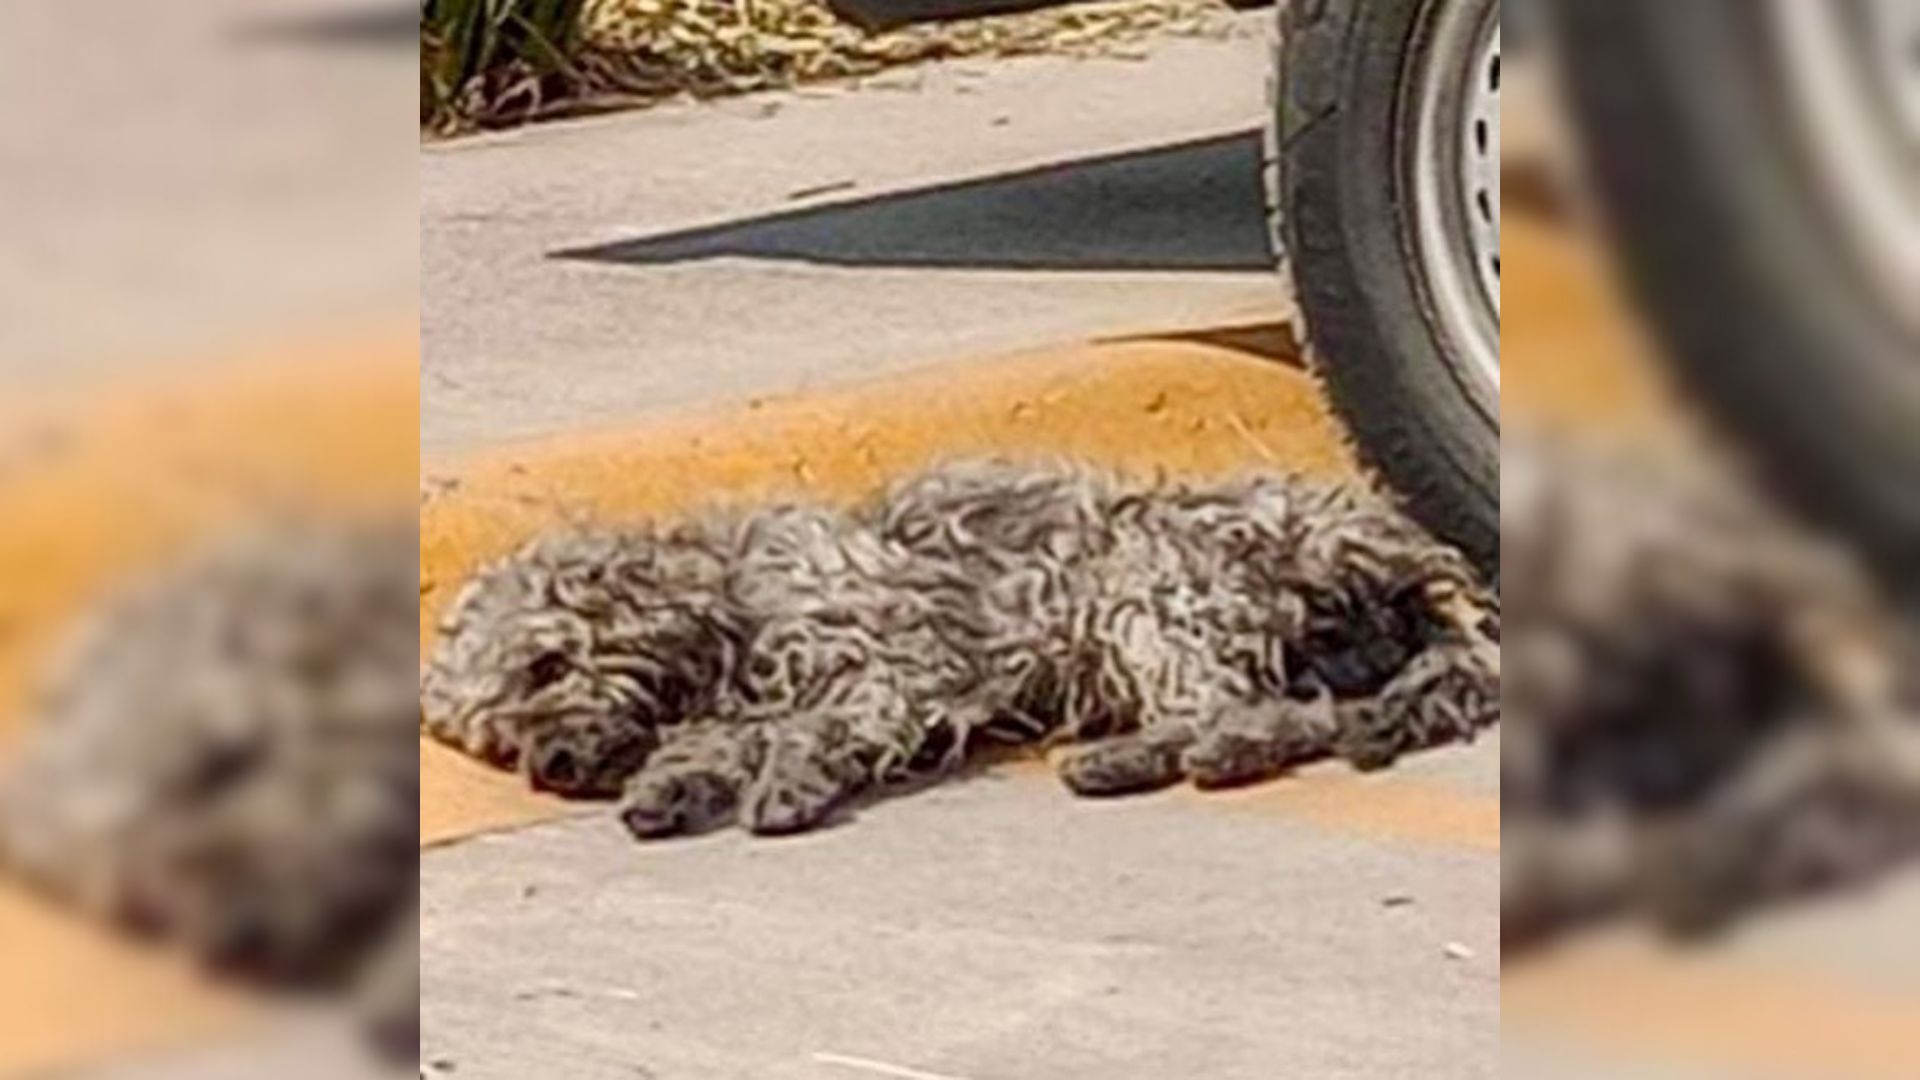 Passerby Finds A Strange Object Lying Under A Car, Then Comes To A Shocking Realization